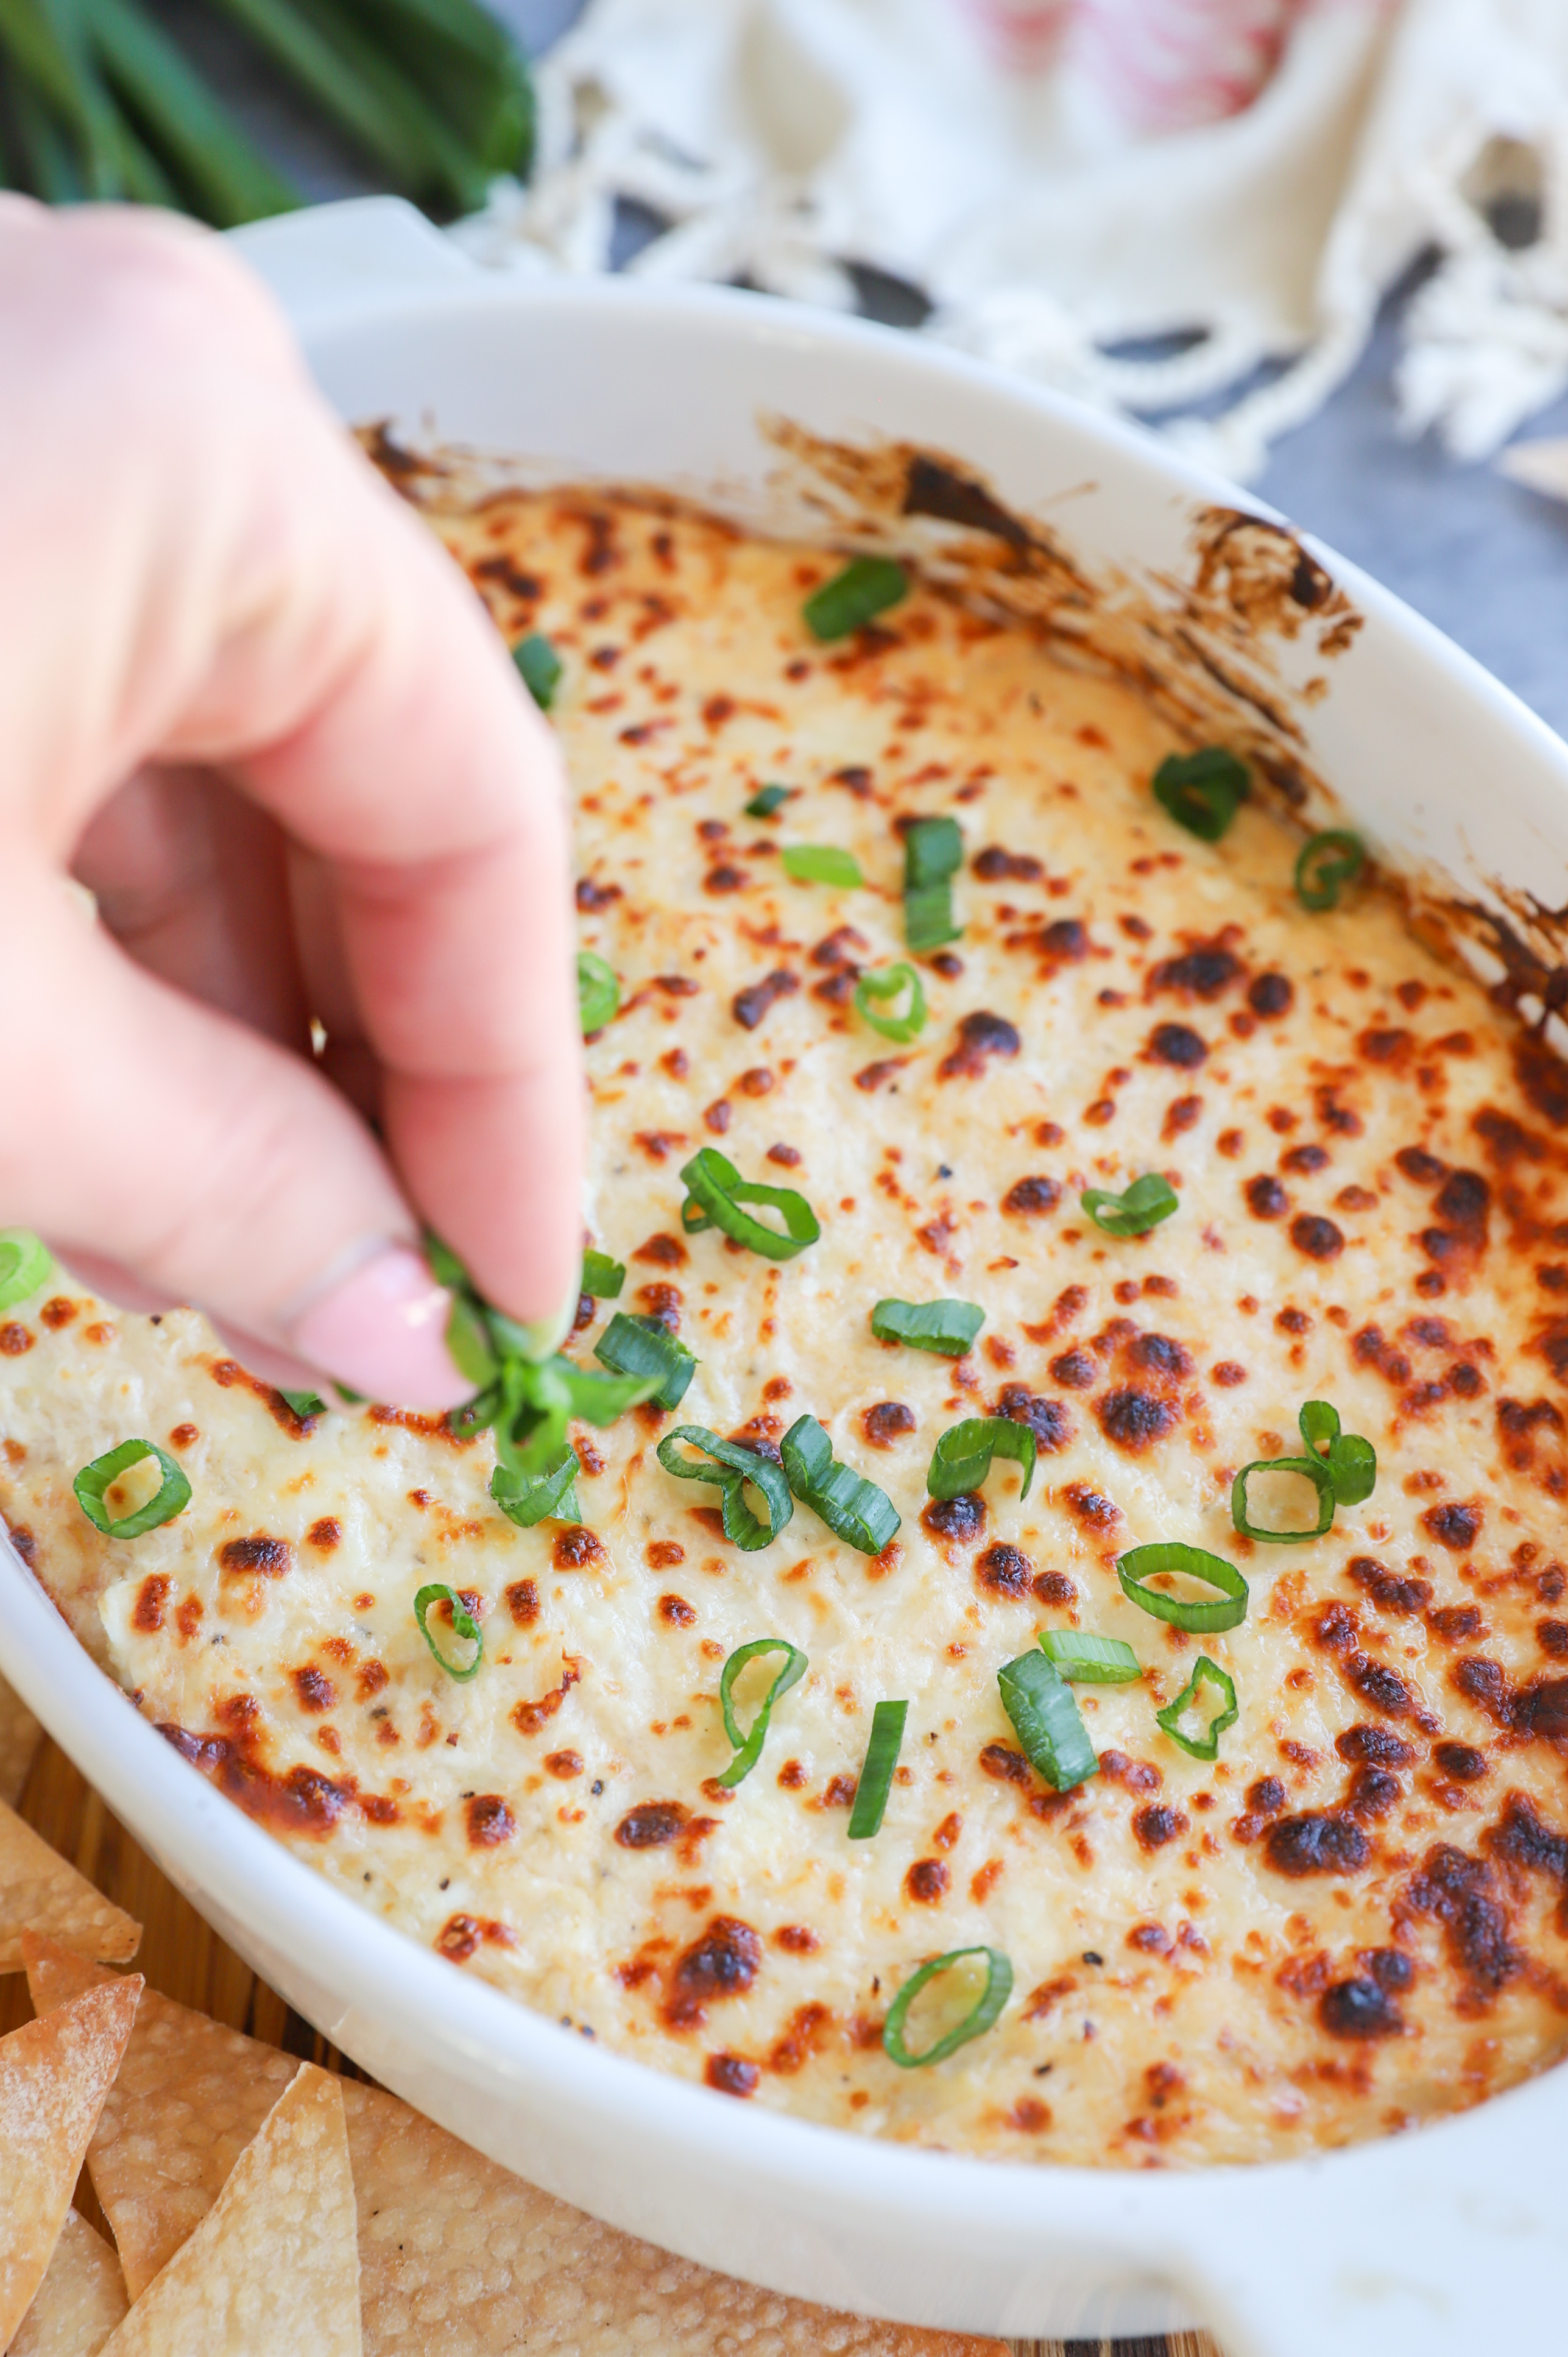 Garnishing cheese dip with green onions image